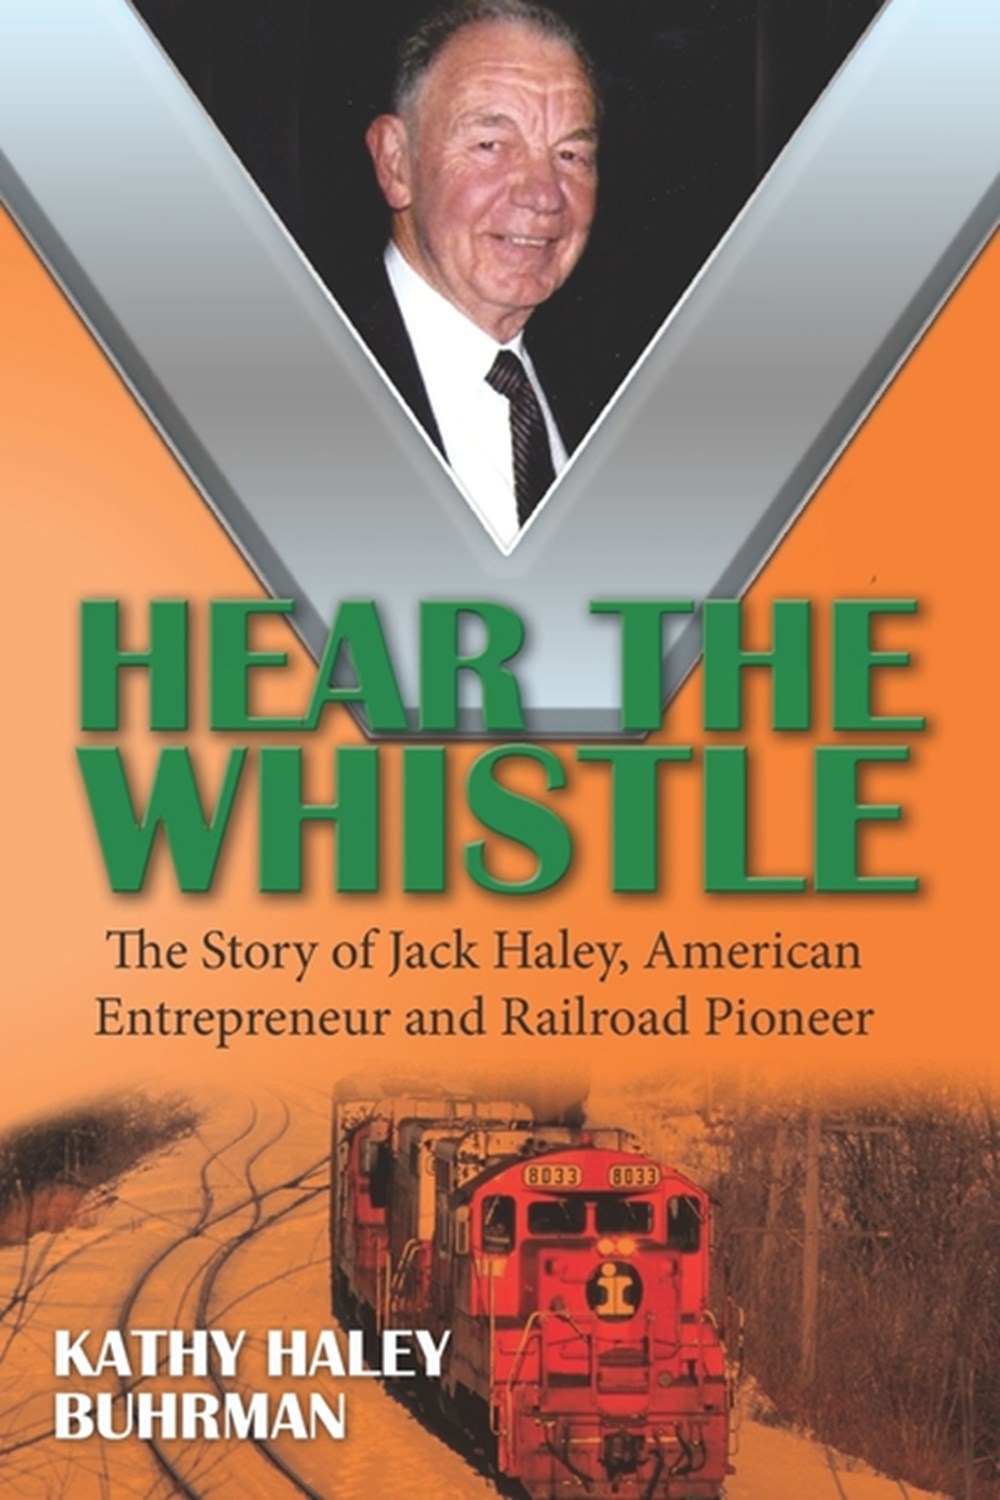 Hear the Whistle The Story of Jack Haley, American Entrepreneur and Railroad Pioneer